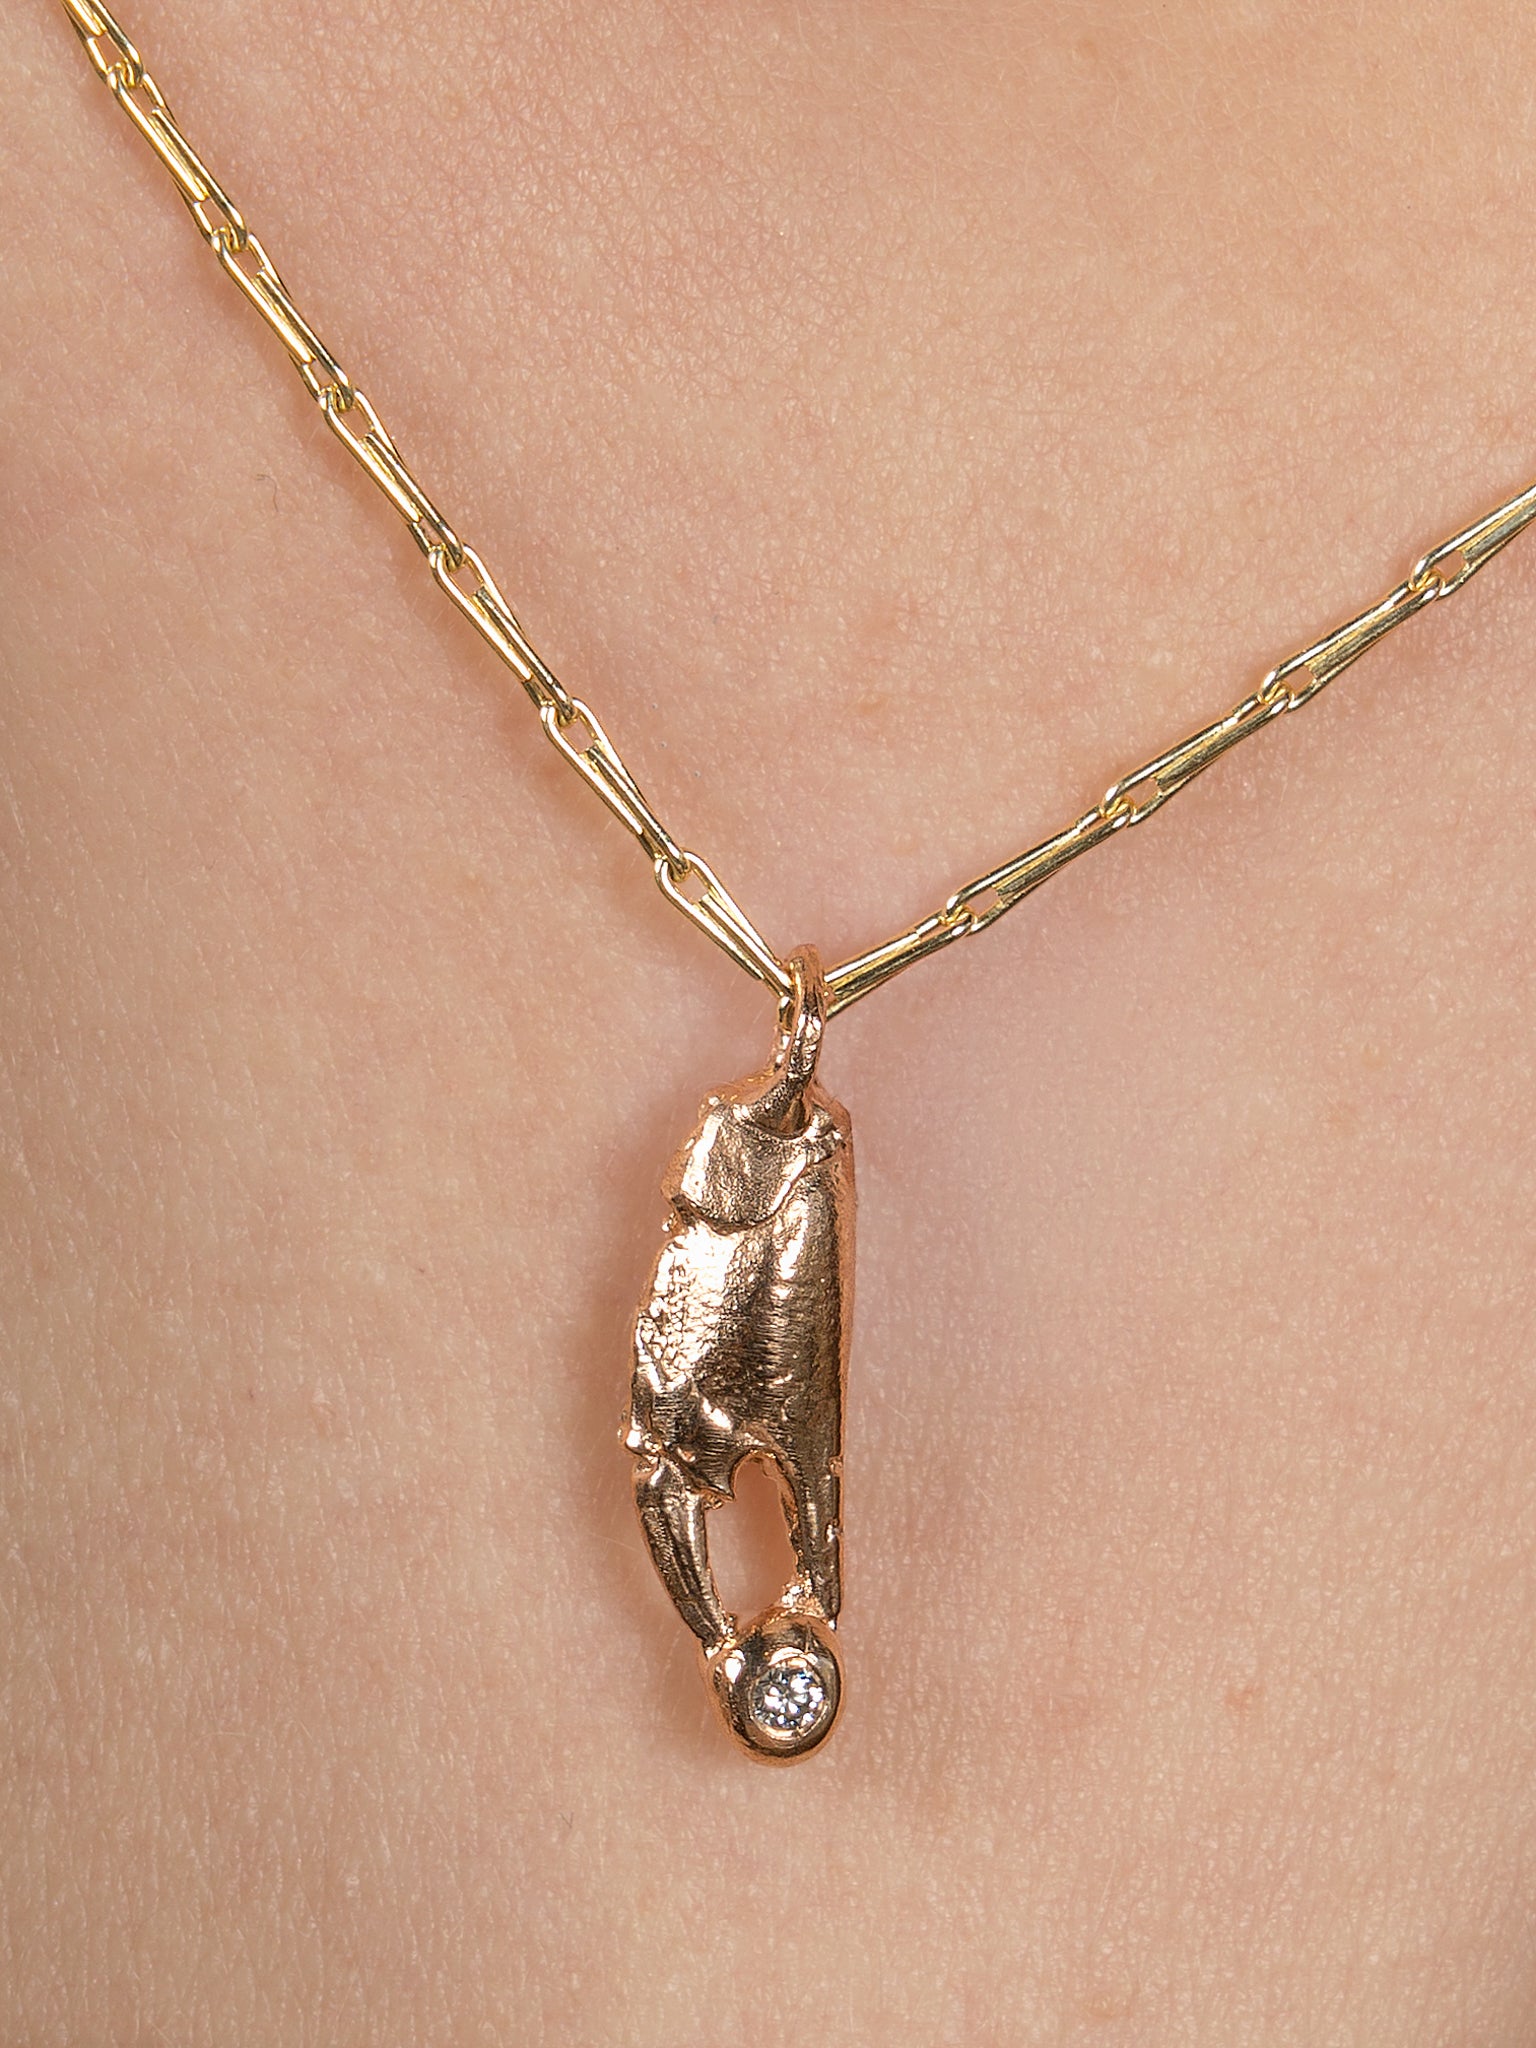 Red gold crab claw on a yellow gold chain holding a diamond close up picture with skin. 